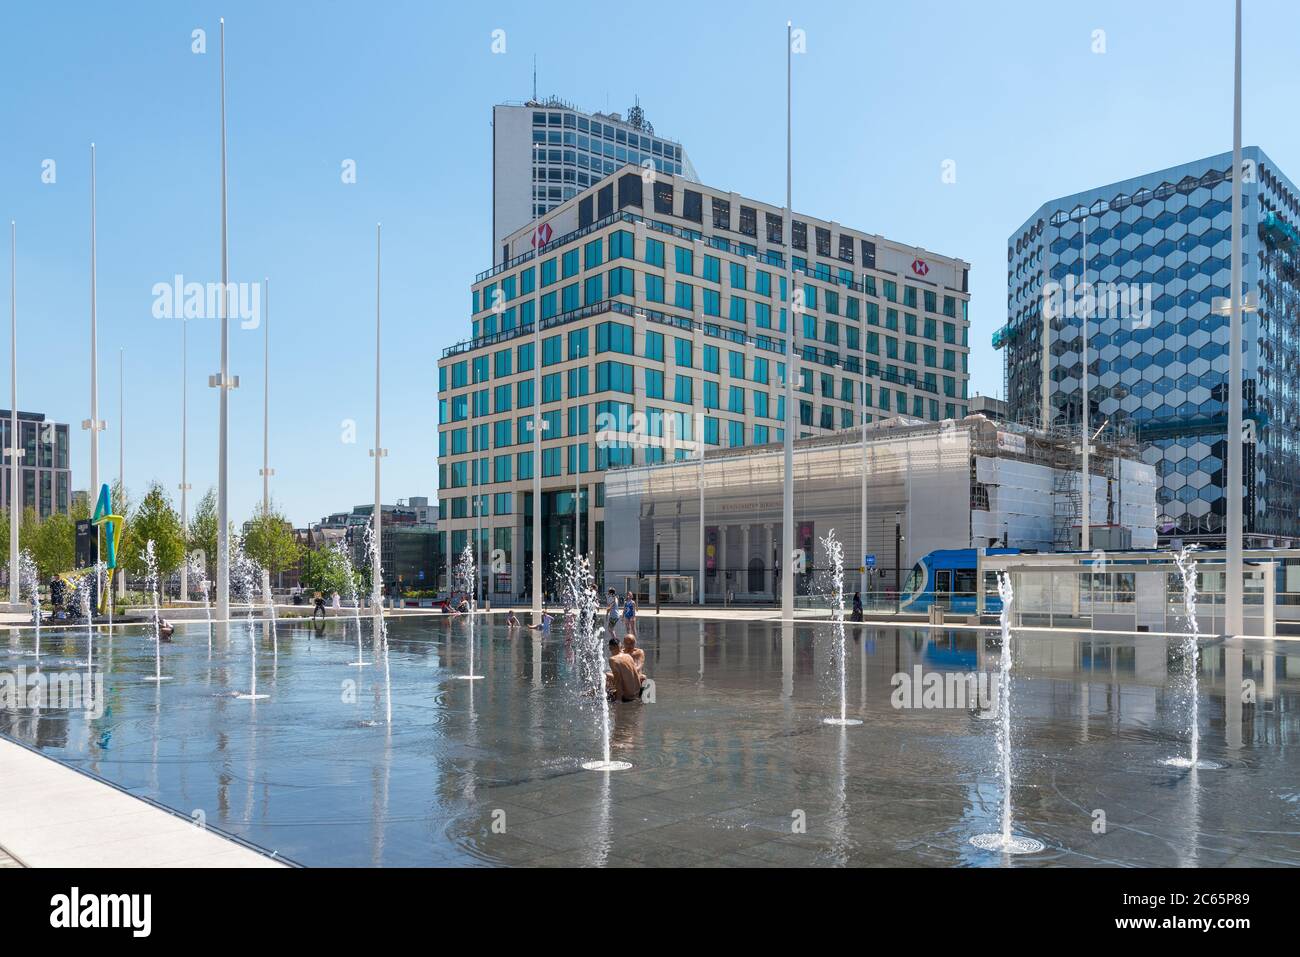 People cooling down in the water fountains in the water mirror in Centenary Square, Birmingham, UK Stock Photo